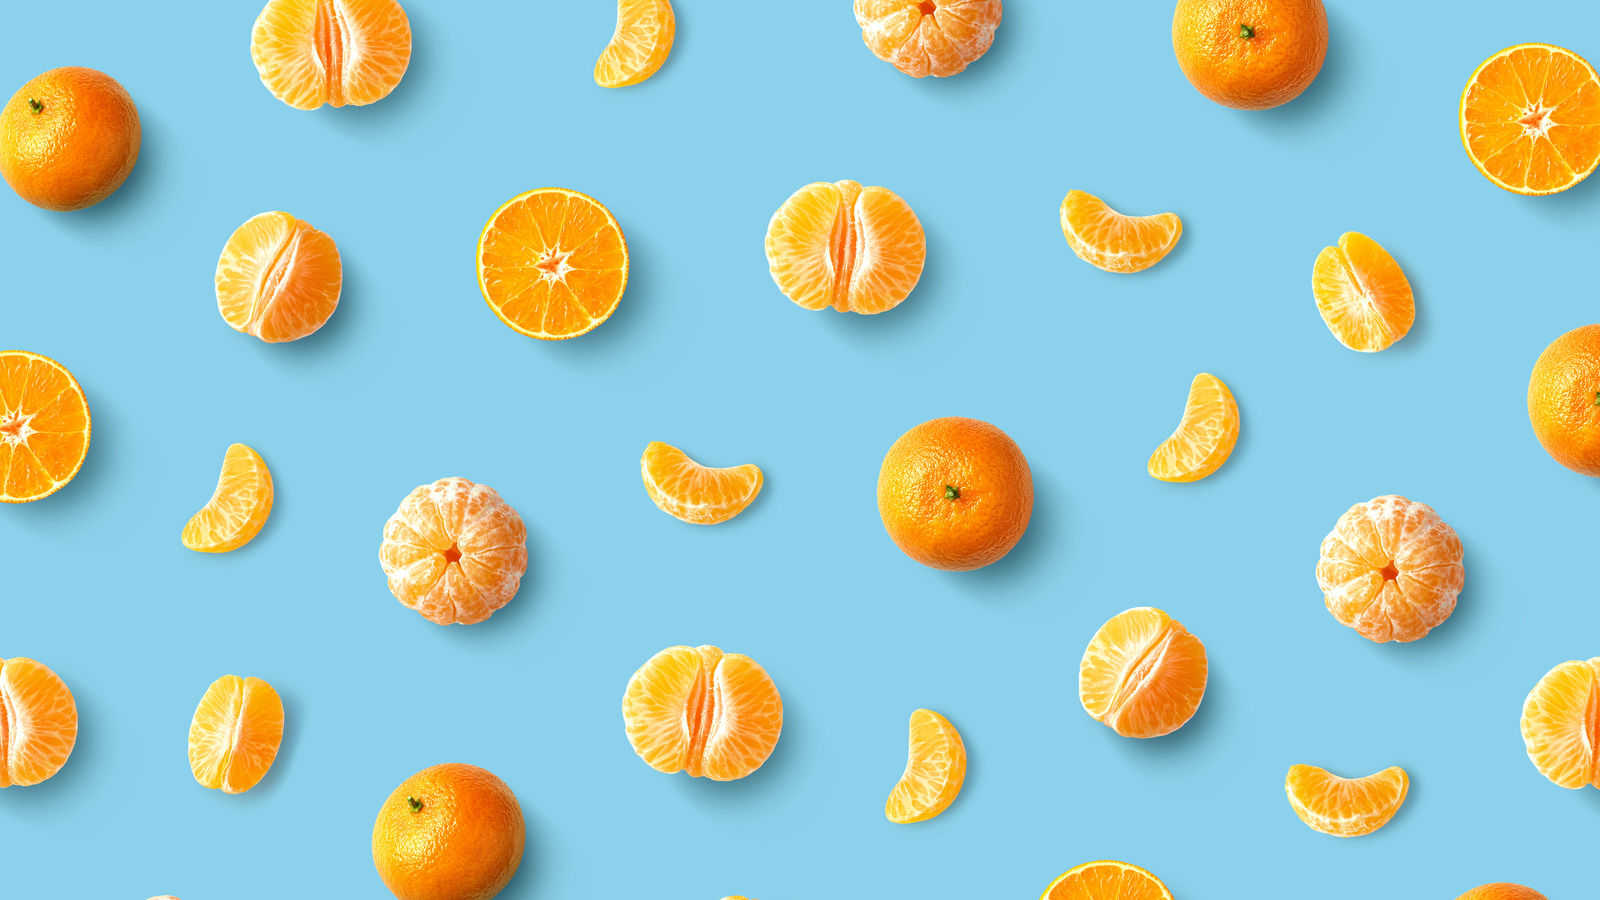 Are Clementines As Healthy As Oranges?